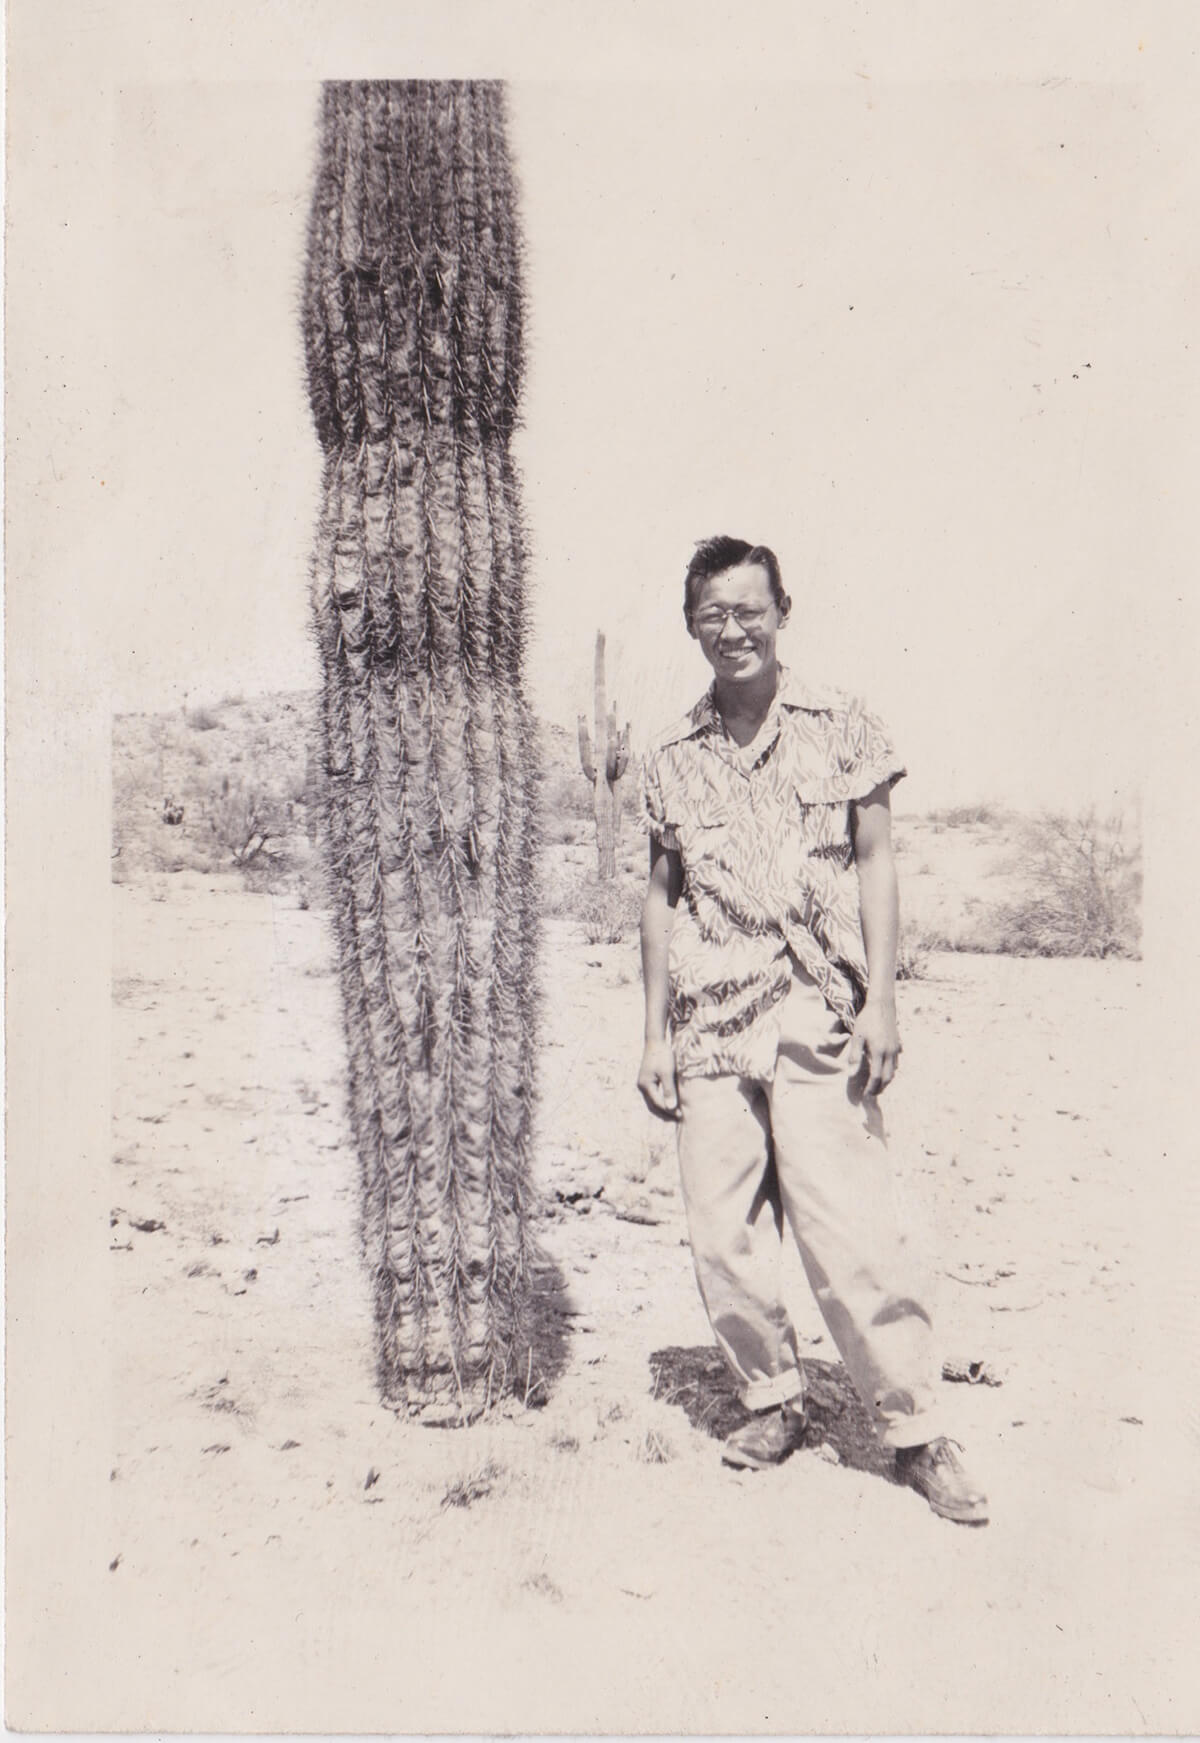 The author's grandfather as a young man in Gila Bend, Arizona.